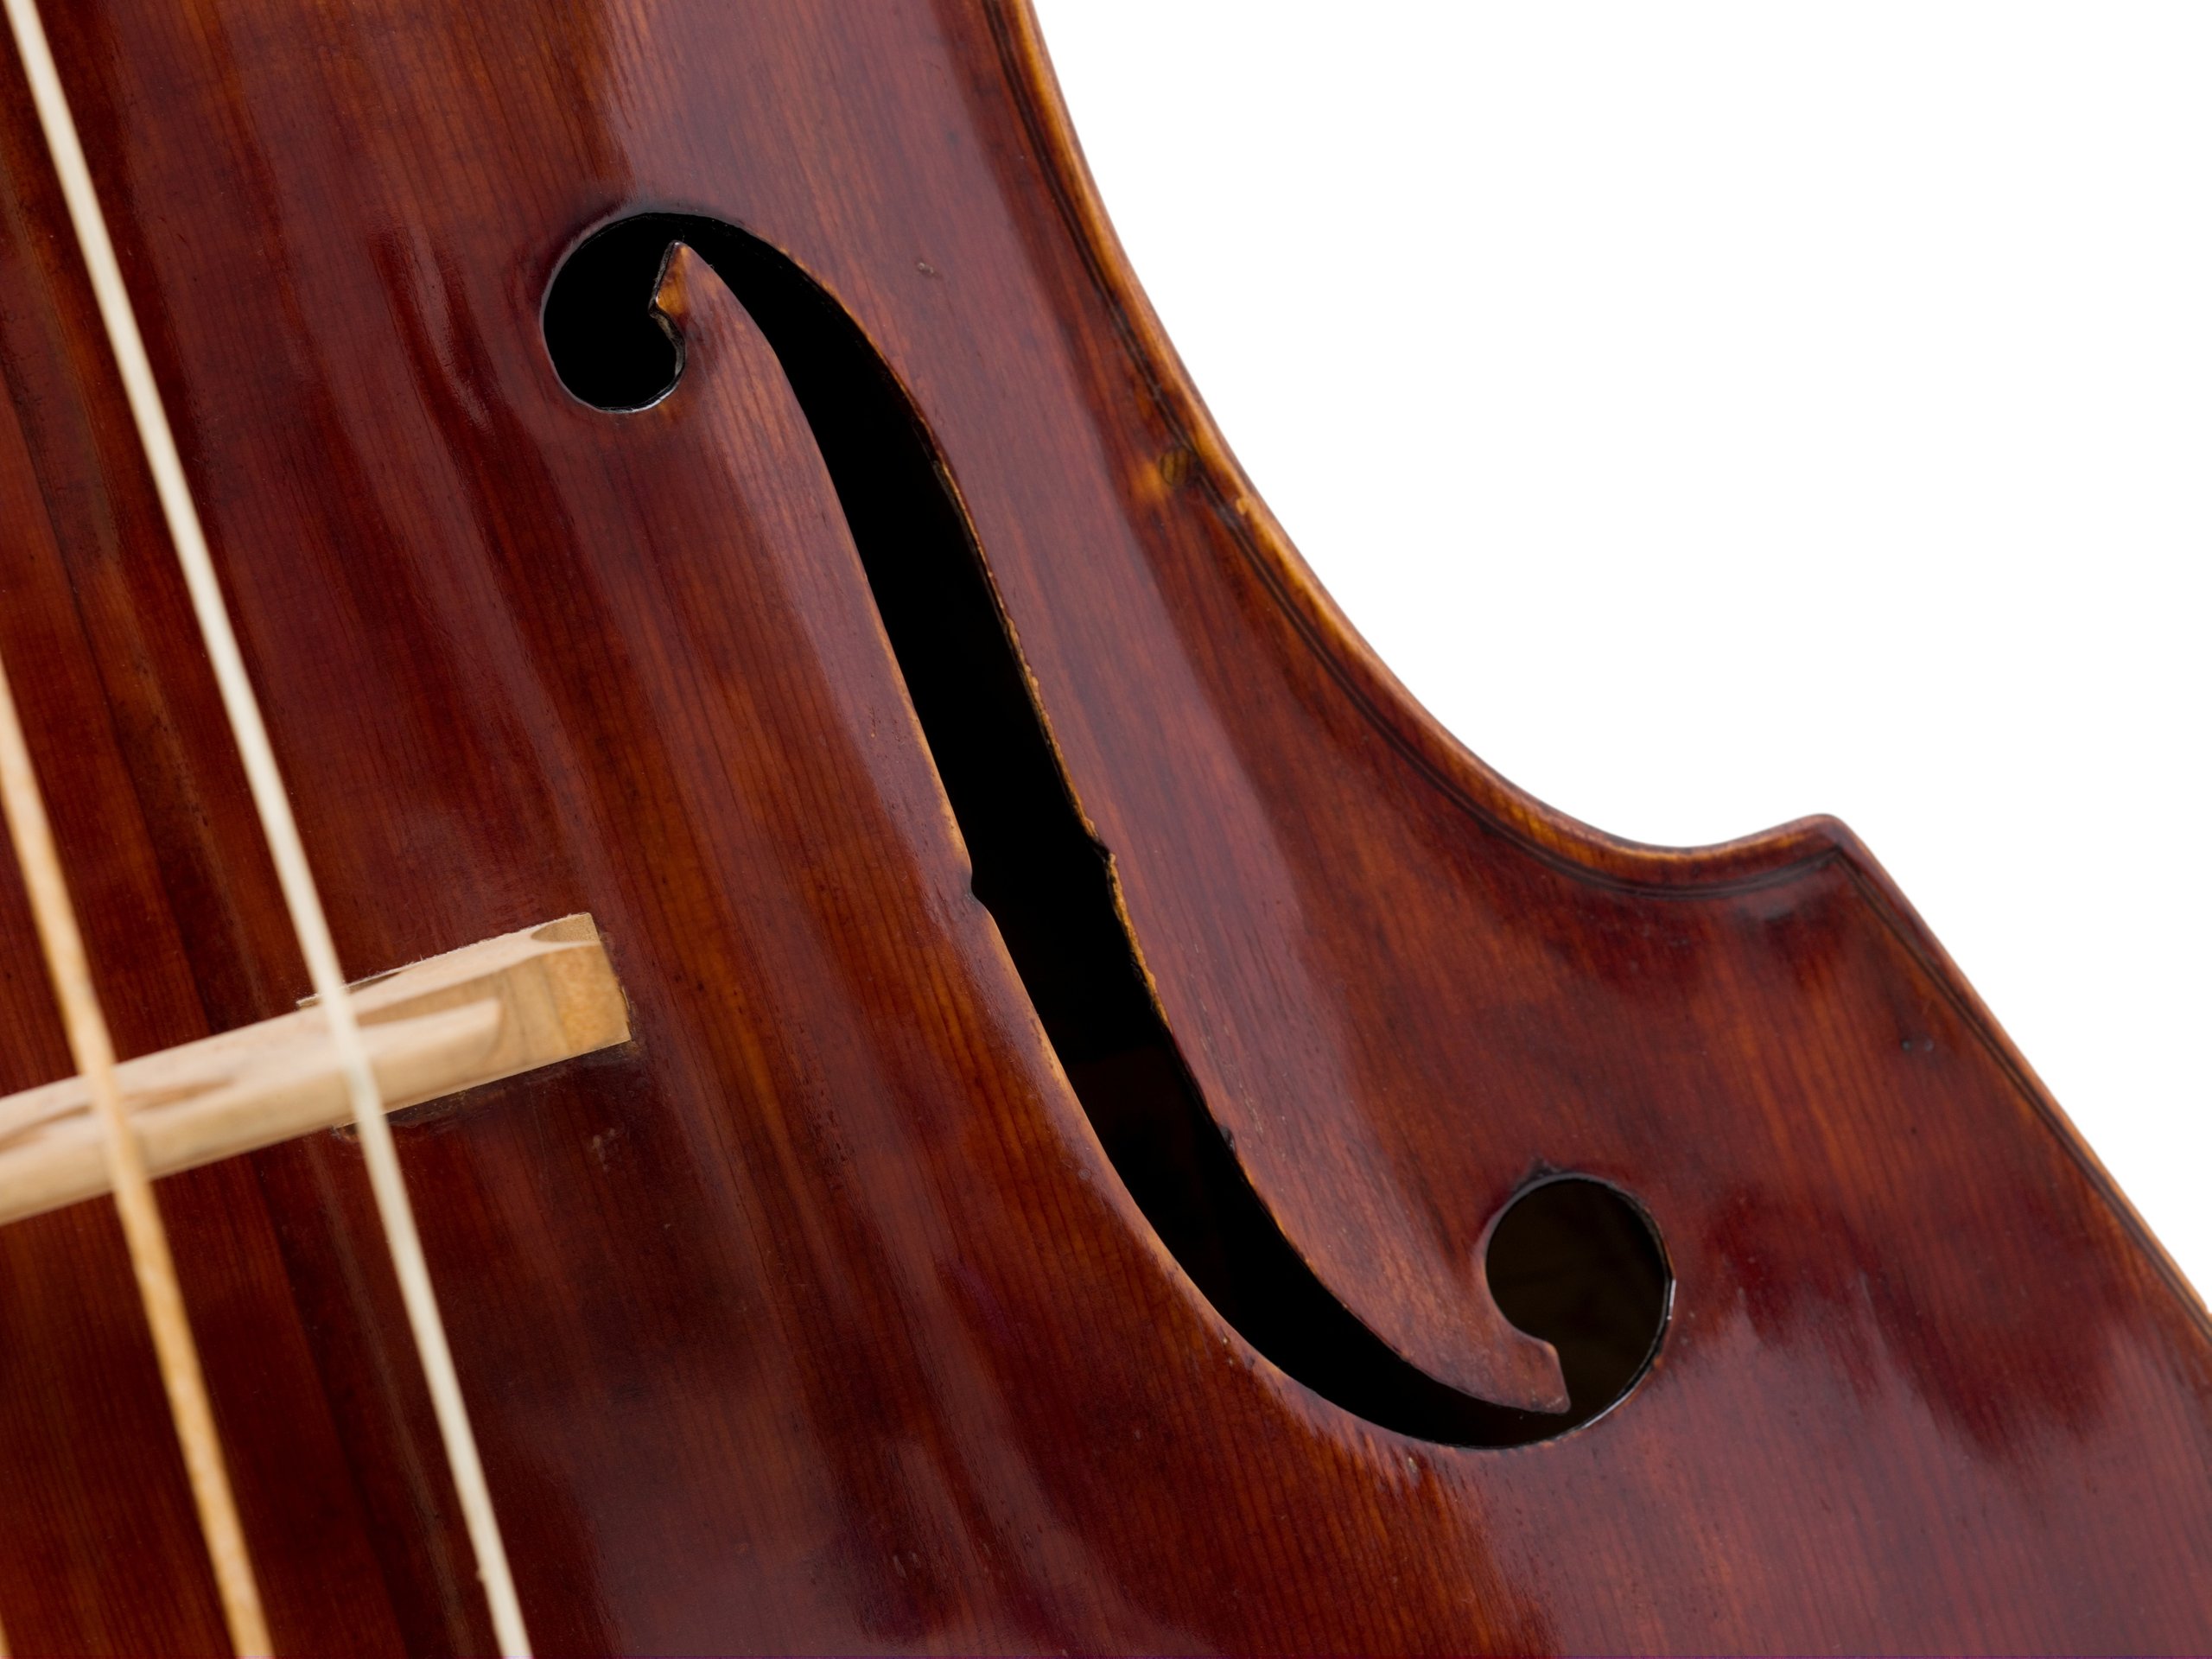 Double bass made by John Devereux